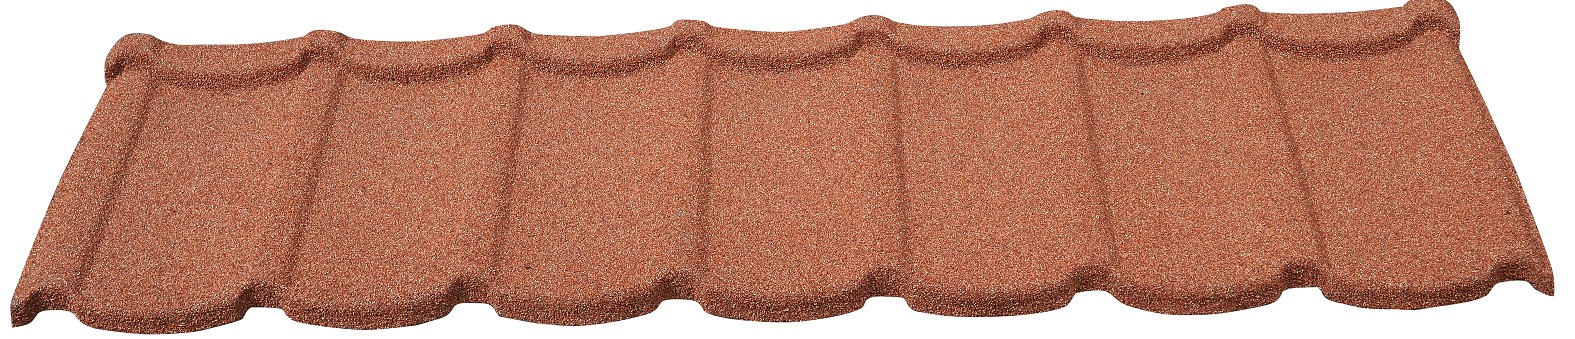 New Sunlight Roof top double roman roof tiles suppliers supply for Courtyard-7